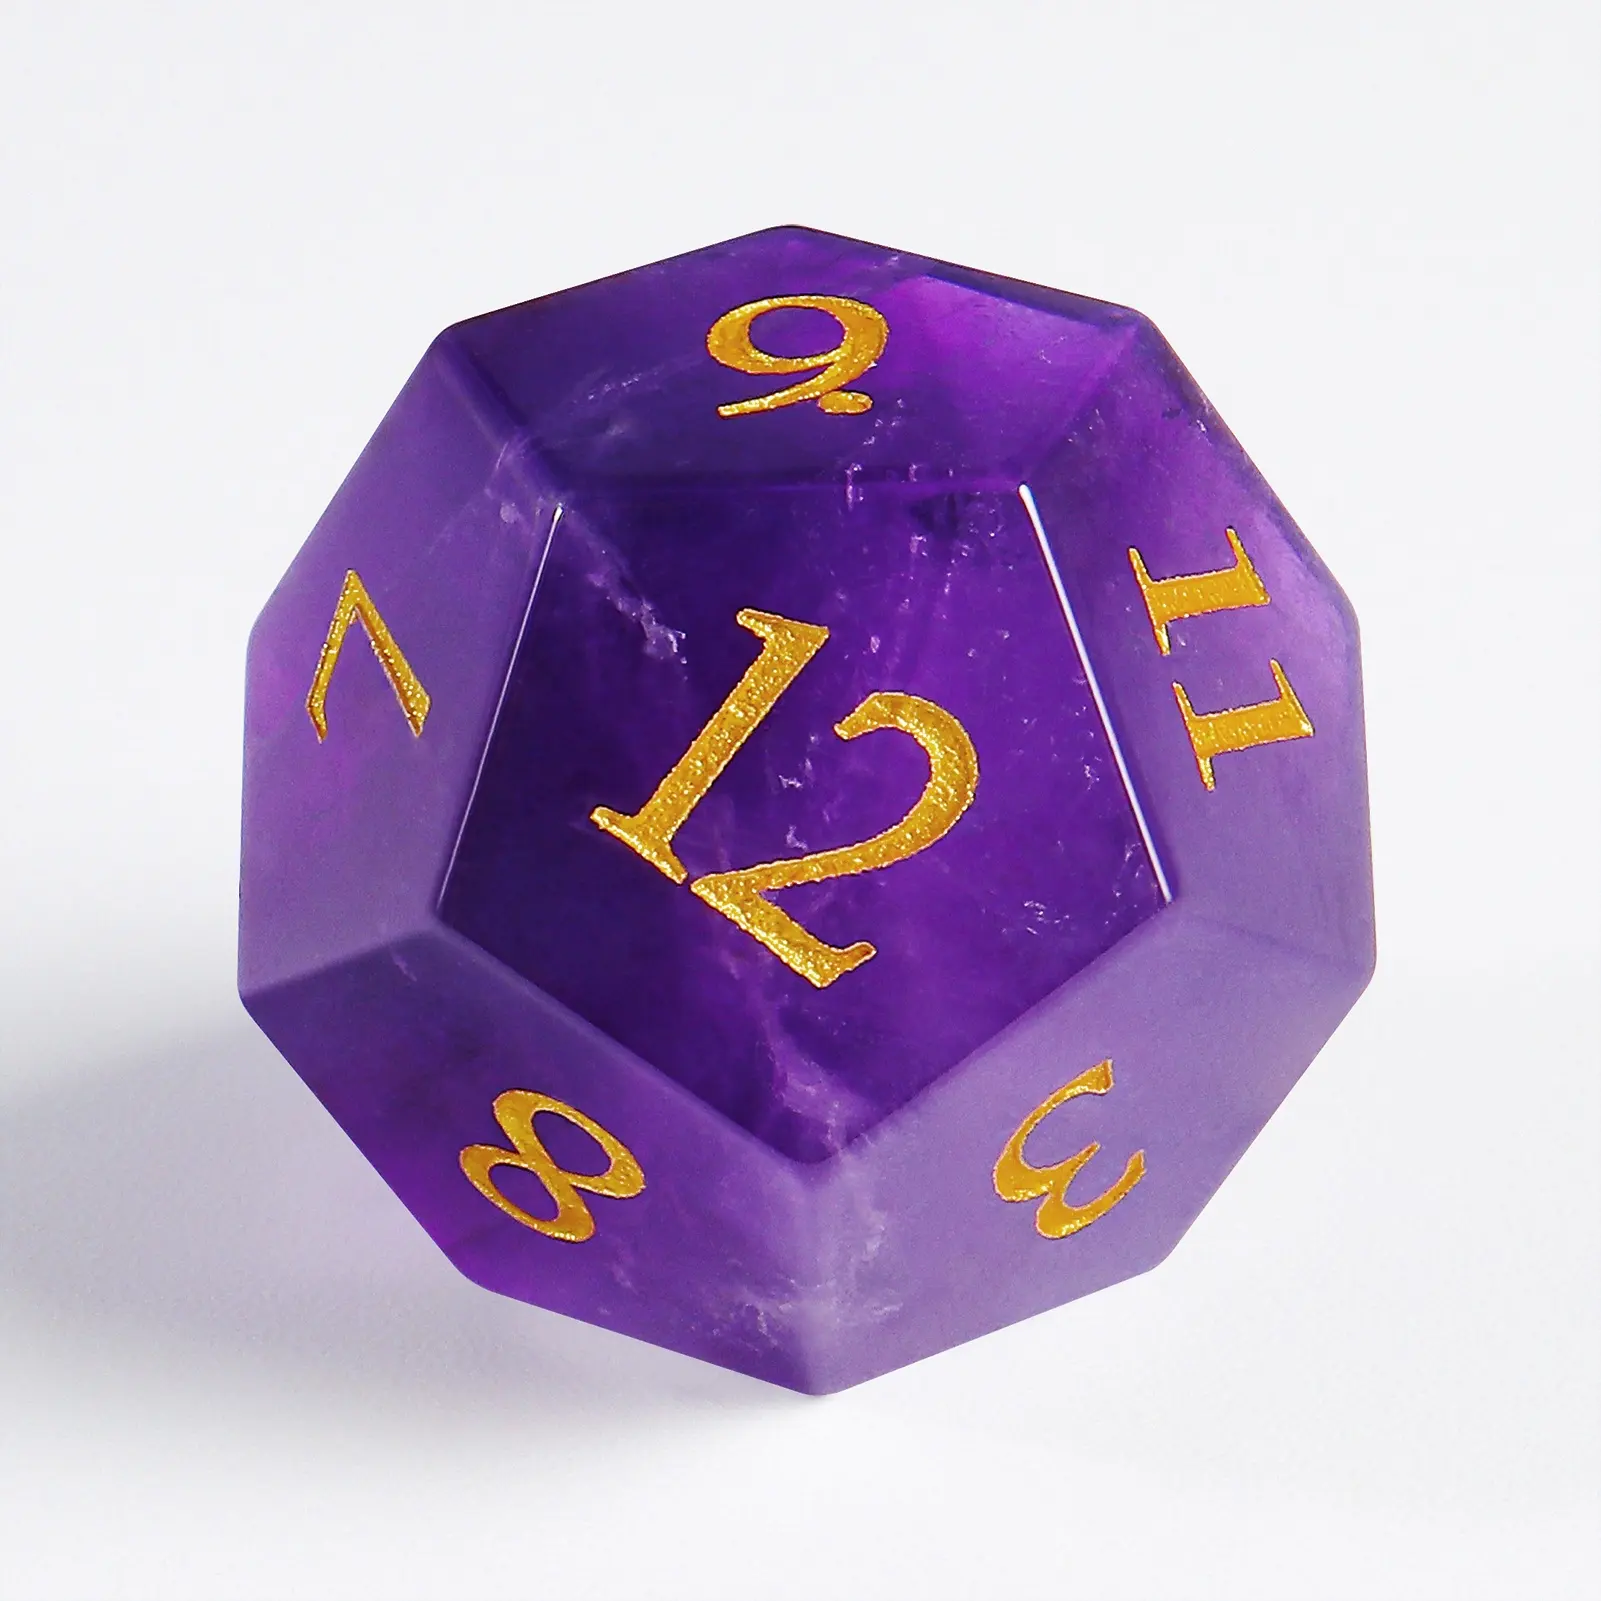 Customized Handmade Stone Precision Amethyst D D Gemstone Dice Set For Role Playing Dungeons And Dragons Tabletop Board Games